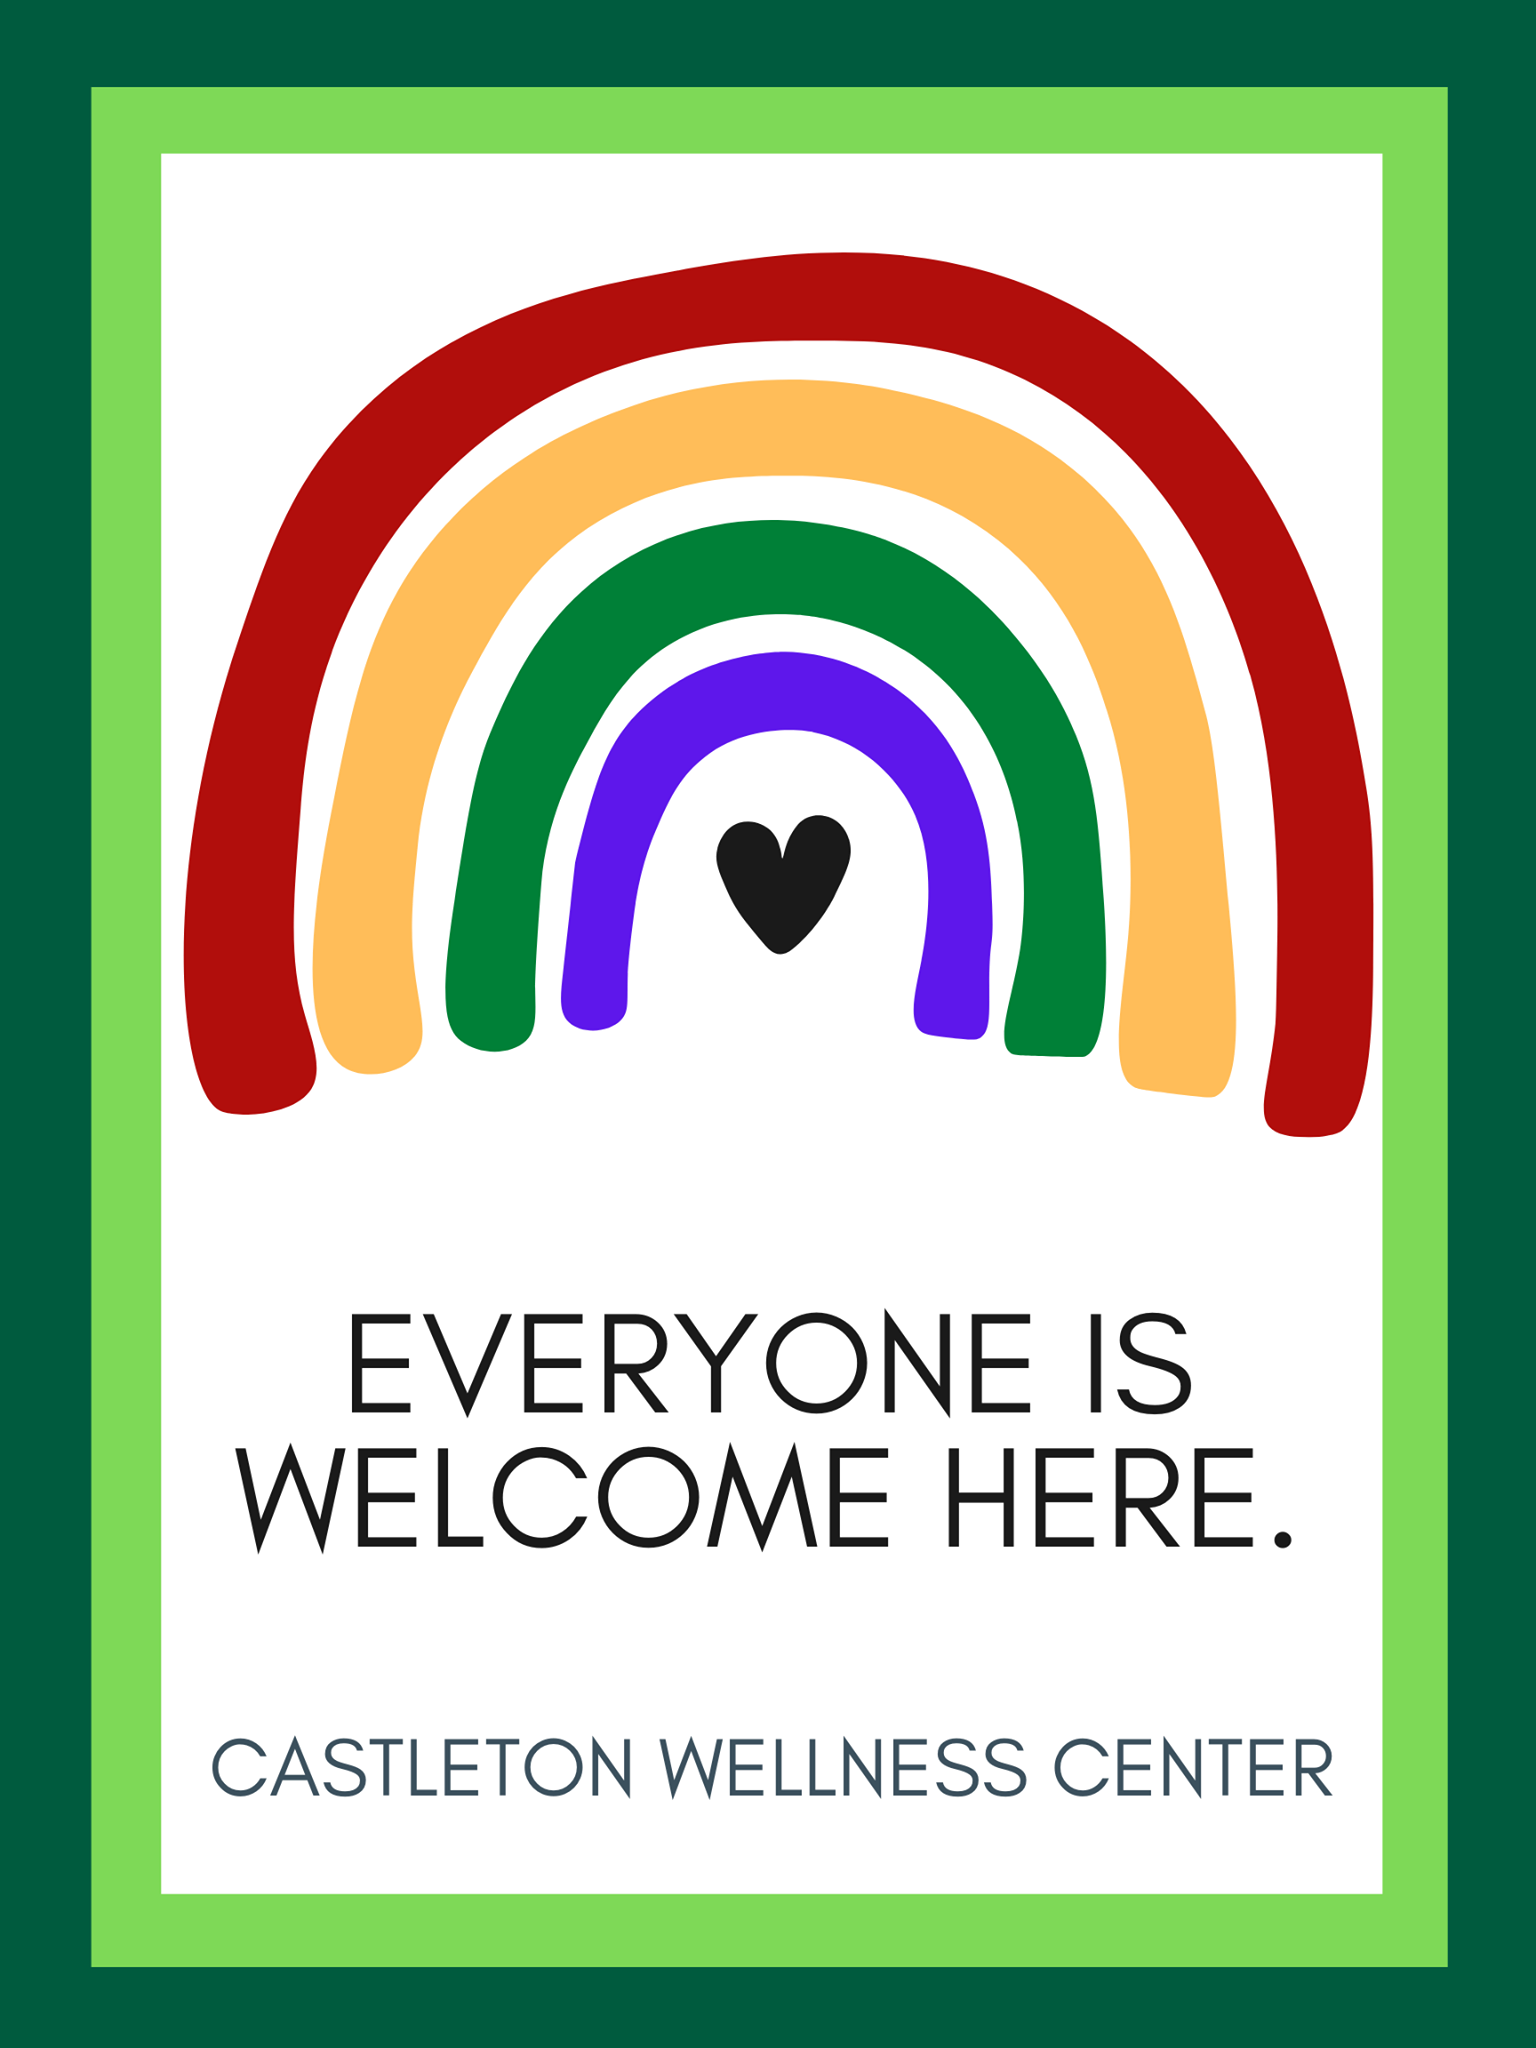 Welcome from the Wellness Center